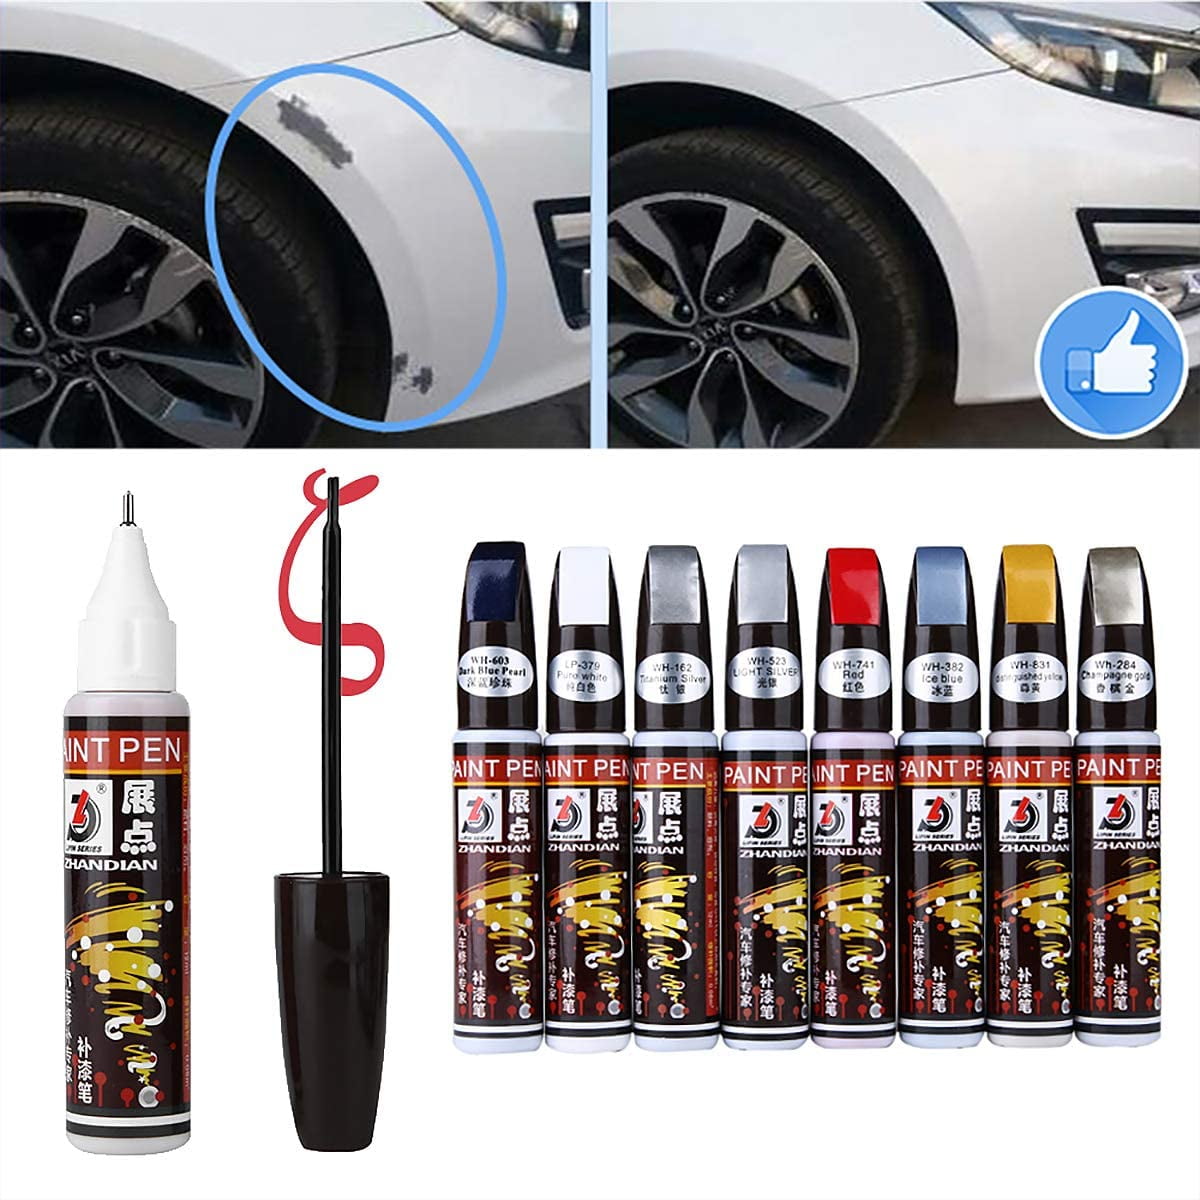 XTryfun Touch Up Paint for Cars, Quick and Easy Car Paint Scratch Repair White, Car Scratch Remover for Deep Scratches, Automotive Touch Up Paint